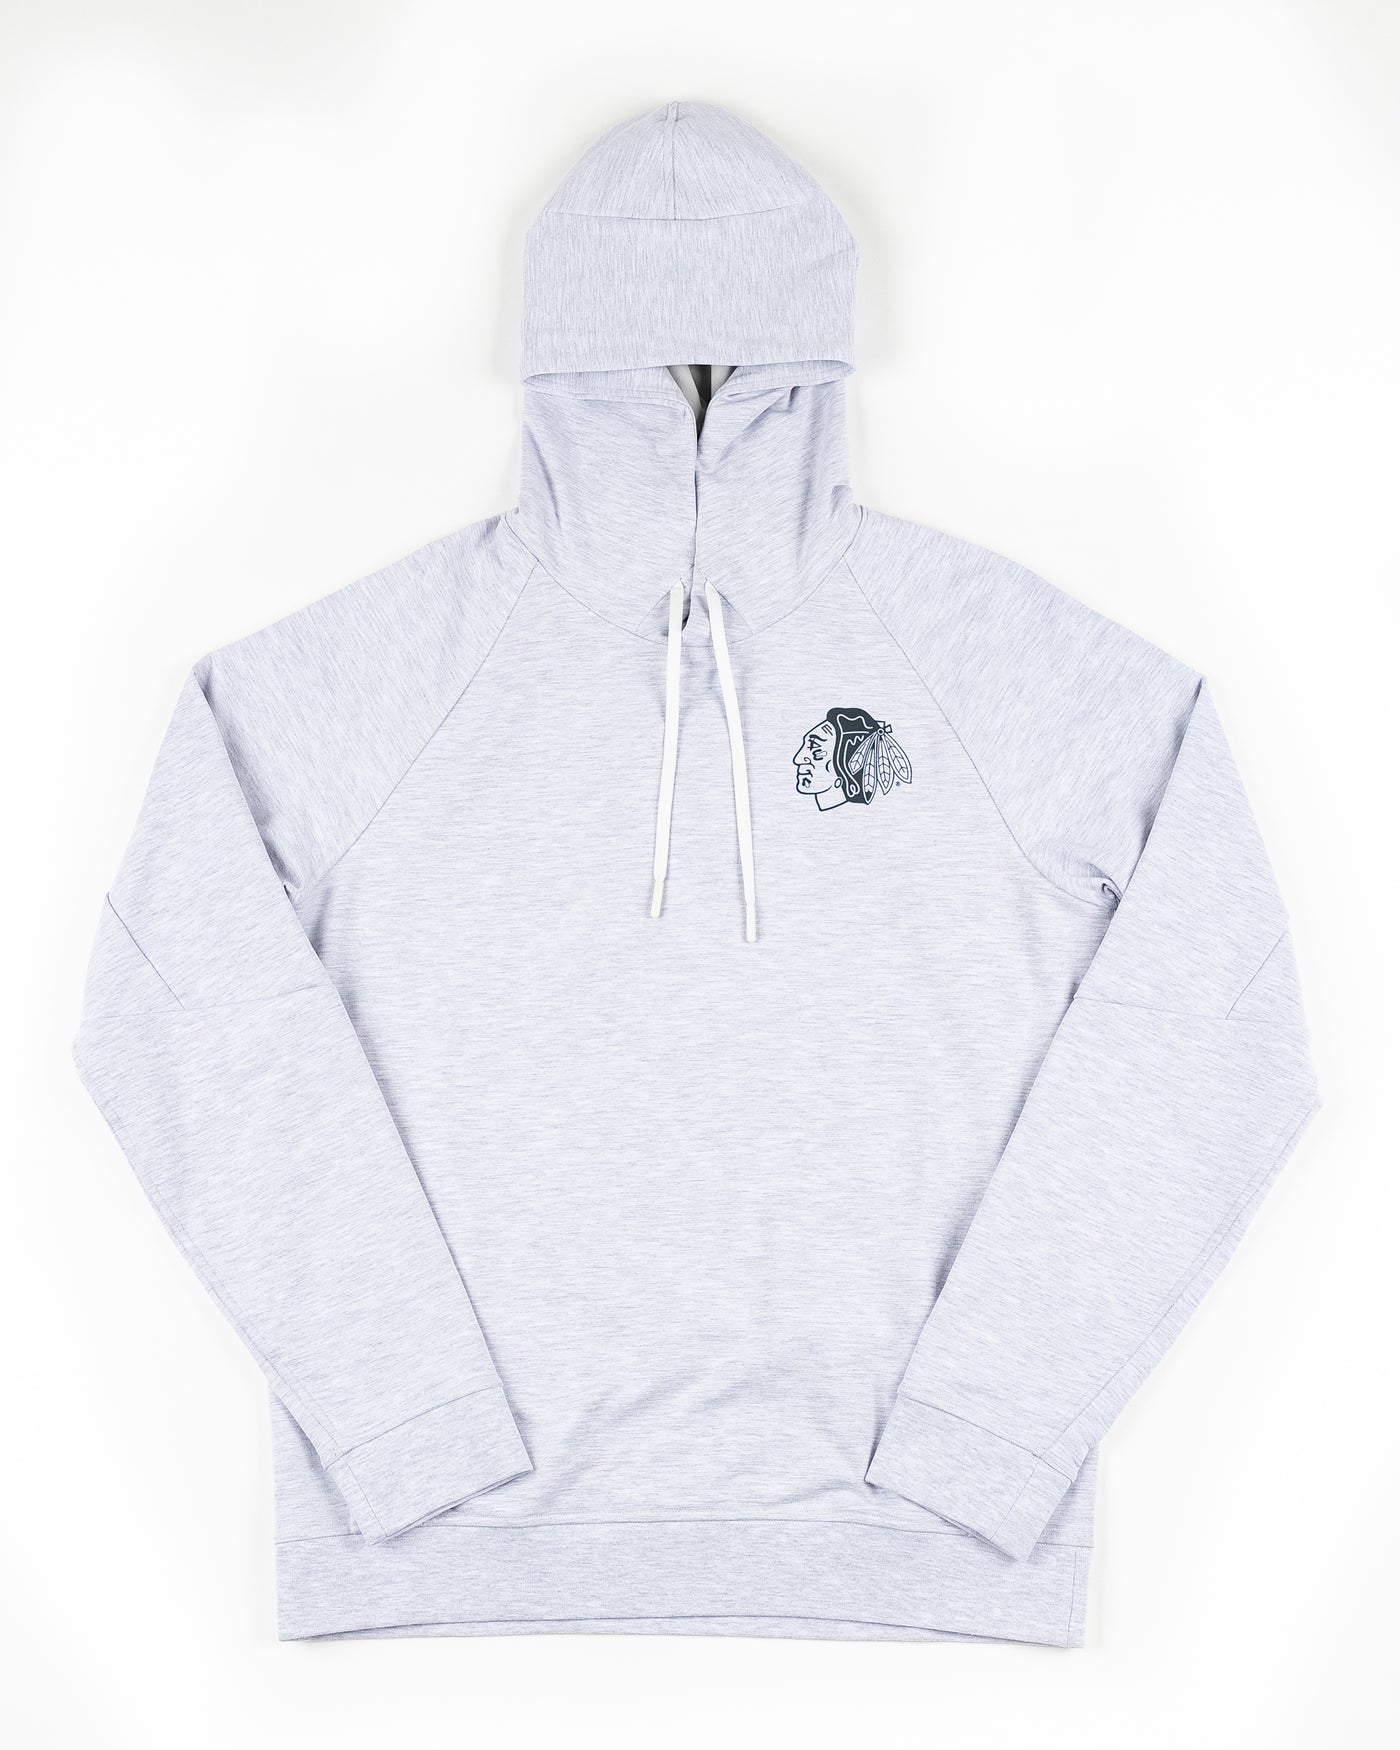 grey lululemon hoodie with tonal Chicago Blackhawks primary logo printed on left chest - front lay flat